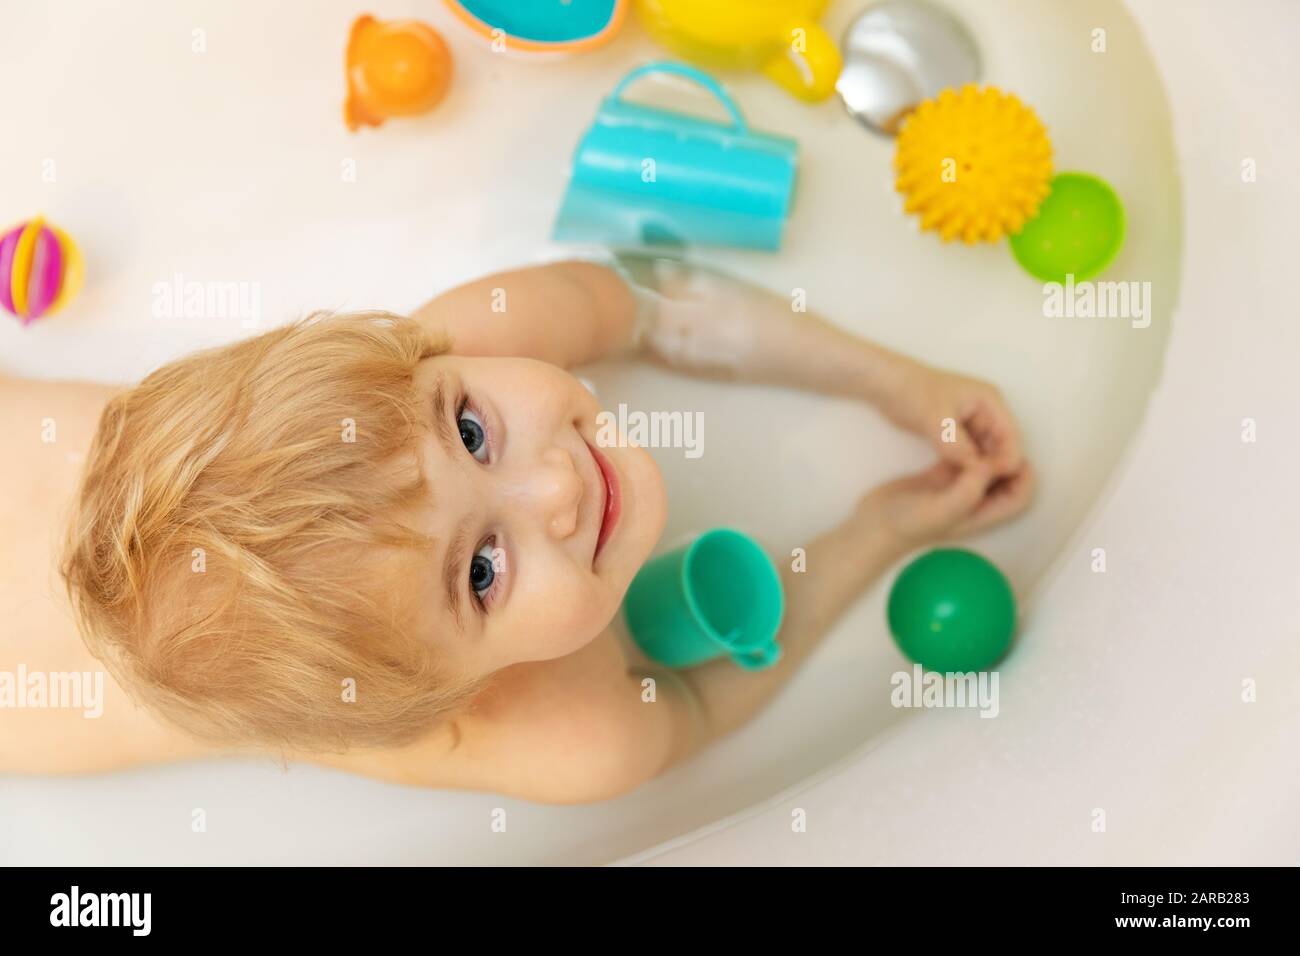 happy child taking a bath and playing with toys. top view Stock Photo